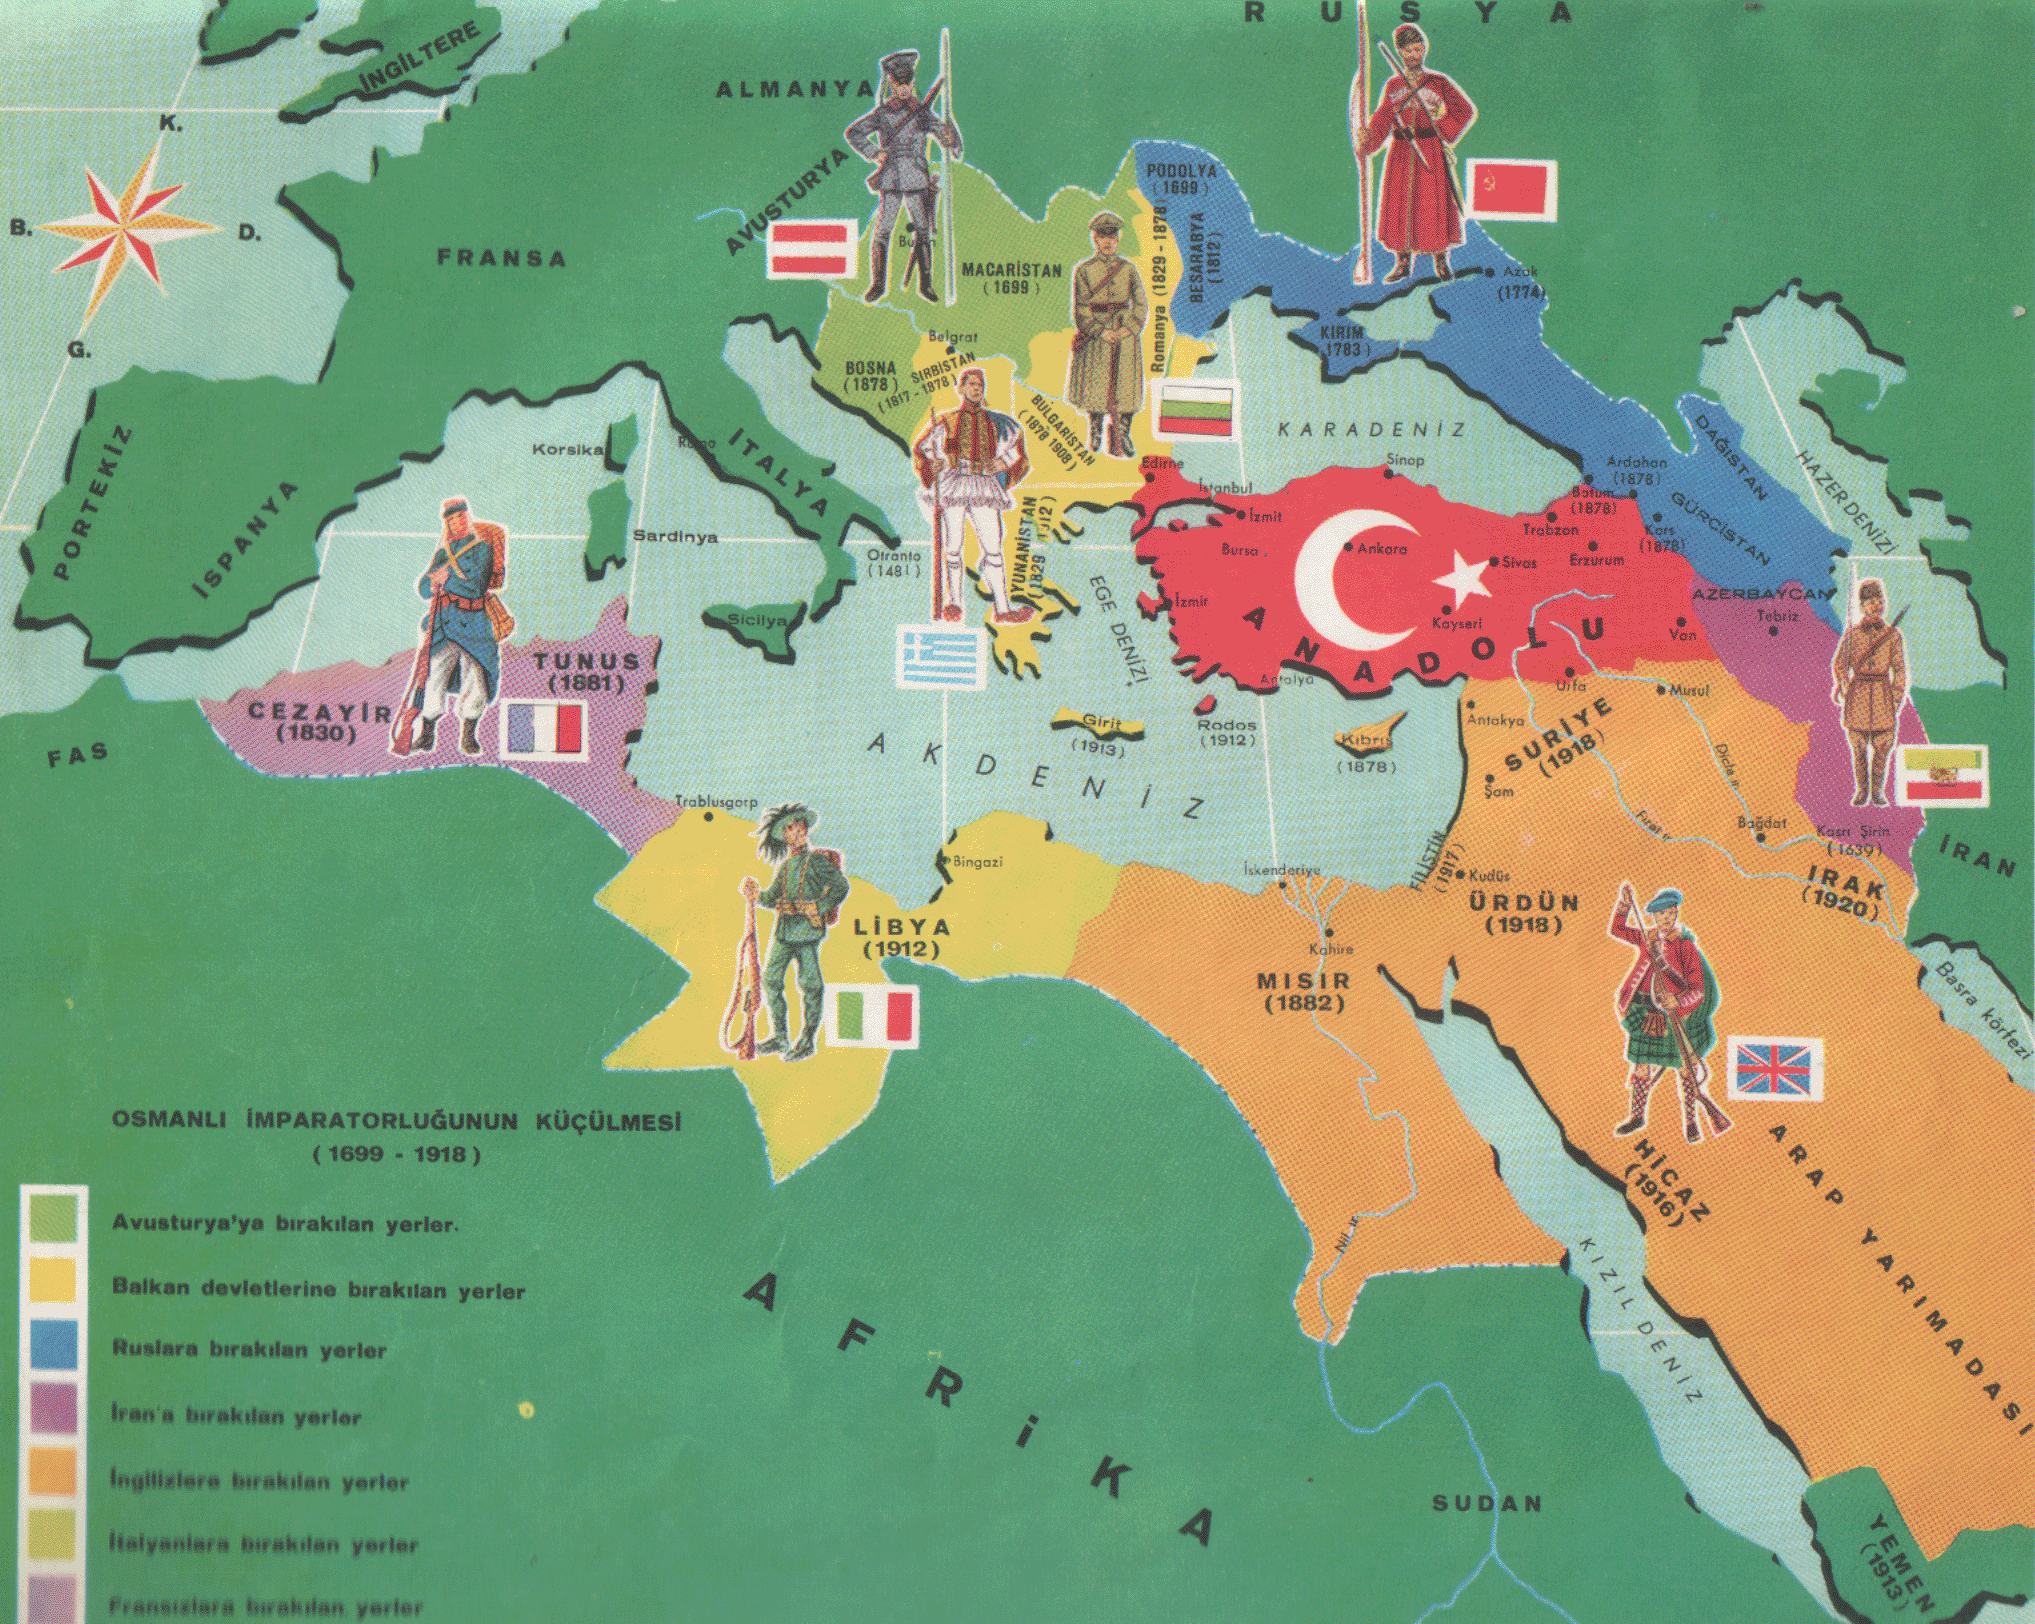 Ottoman Empire Expansion Map